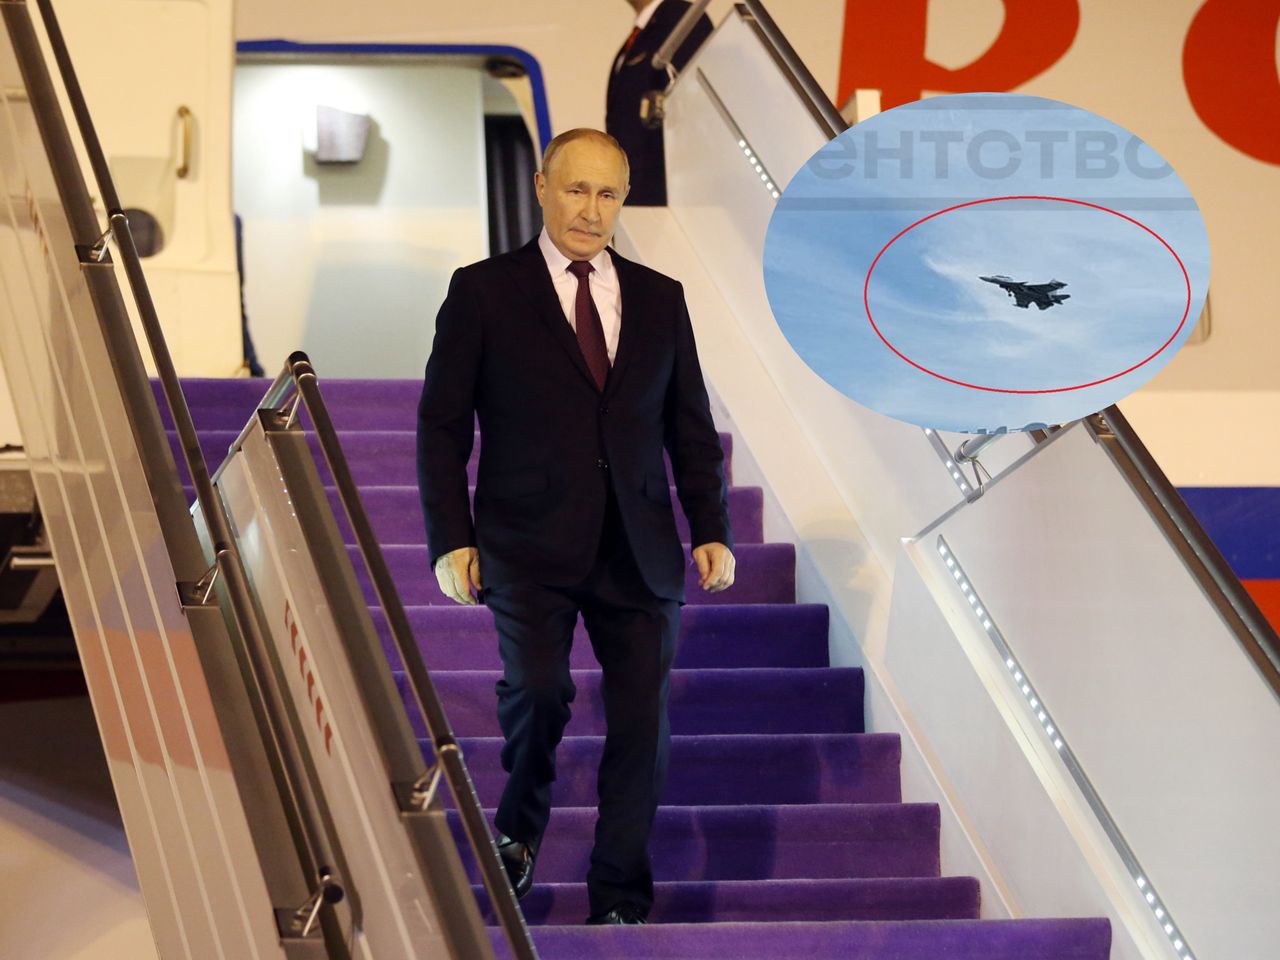 Putin flies in the company of fighter jets.